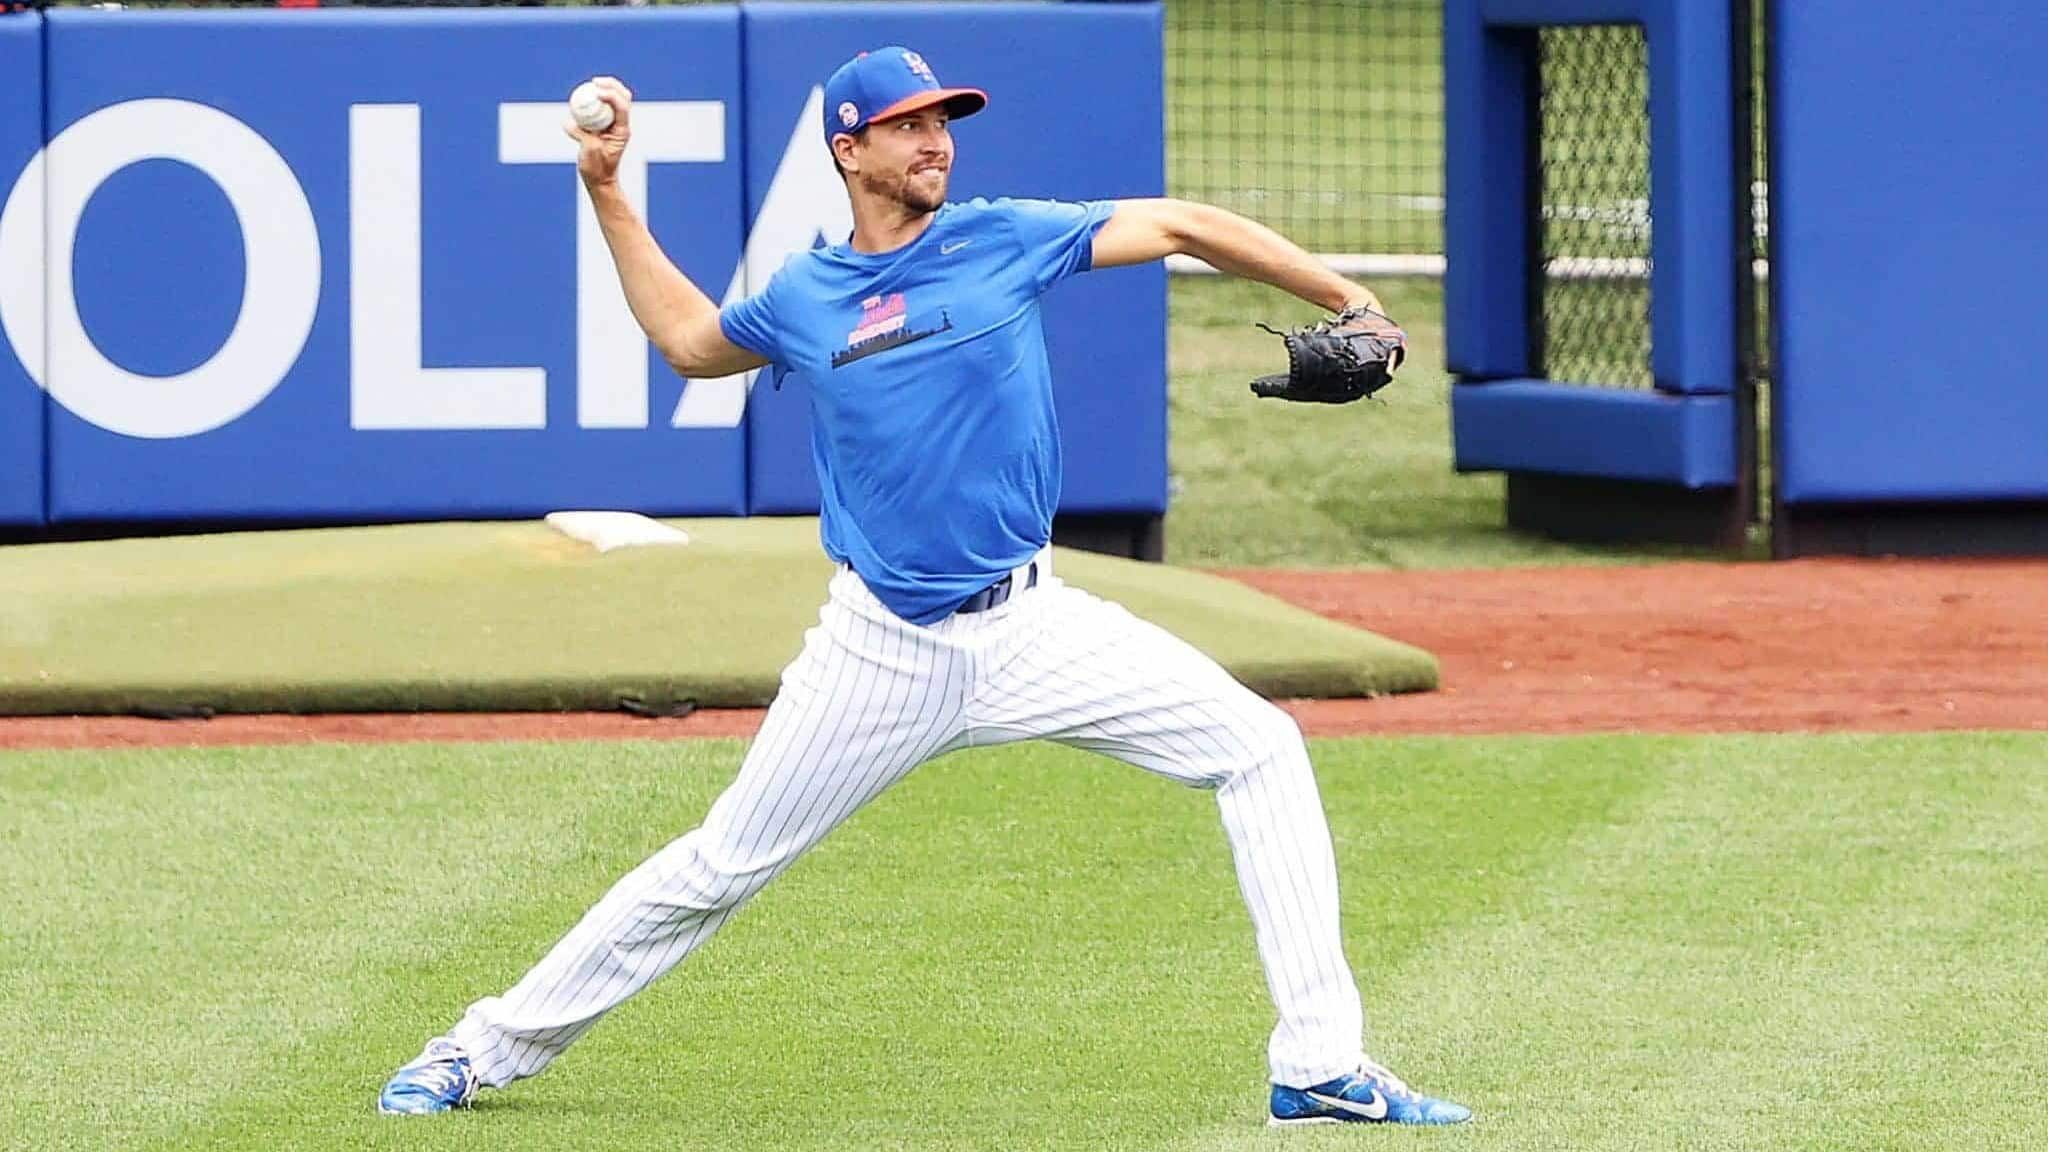 NEW YORK, NEW YORK - JULY 03: Jacob deGrom #48 of the New York Mets throws pitches in the outfield during Major League Baseball Summer Training restart at Citi Field on July 03, 2020 in New York City.